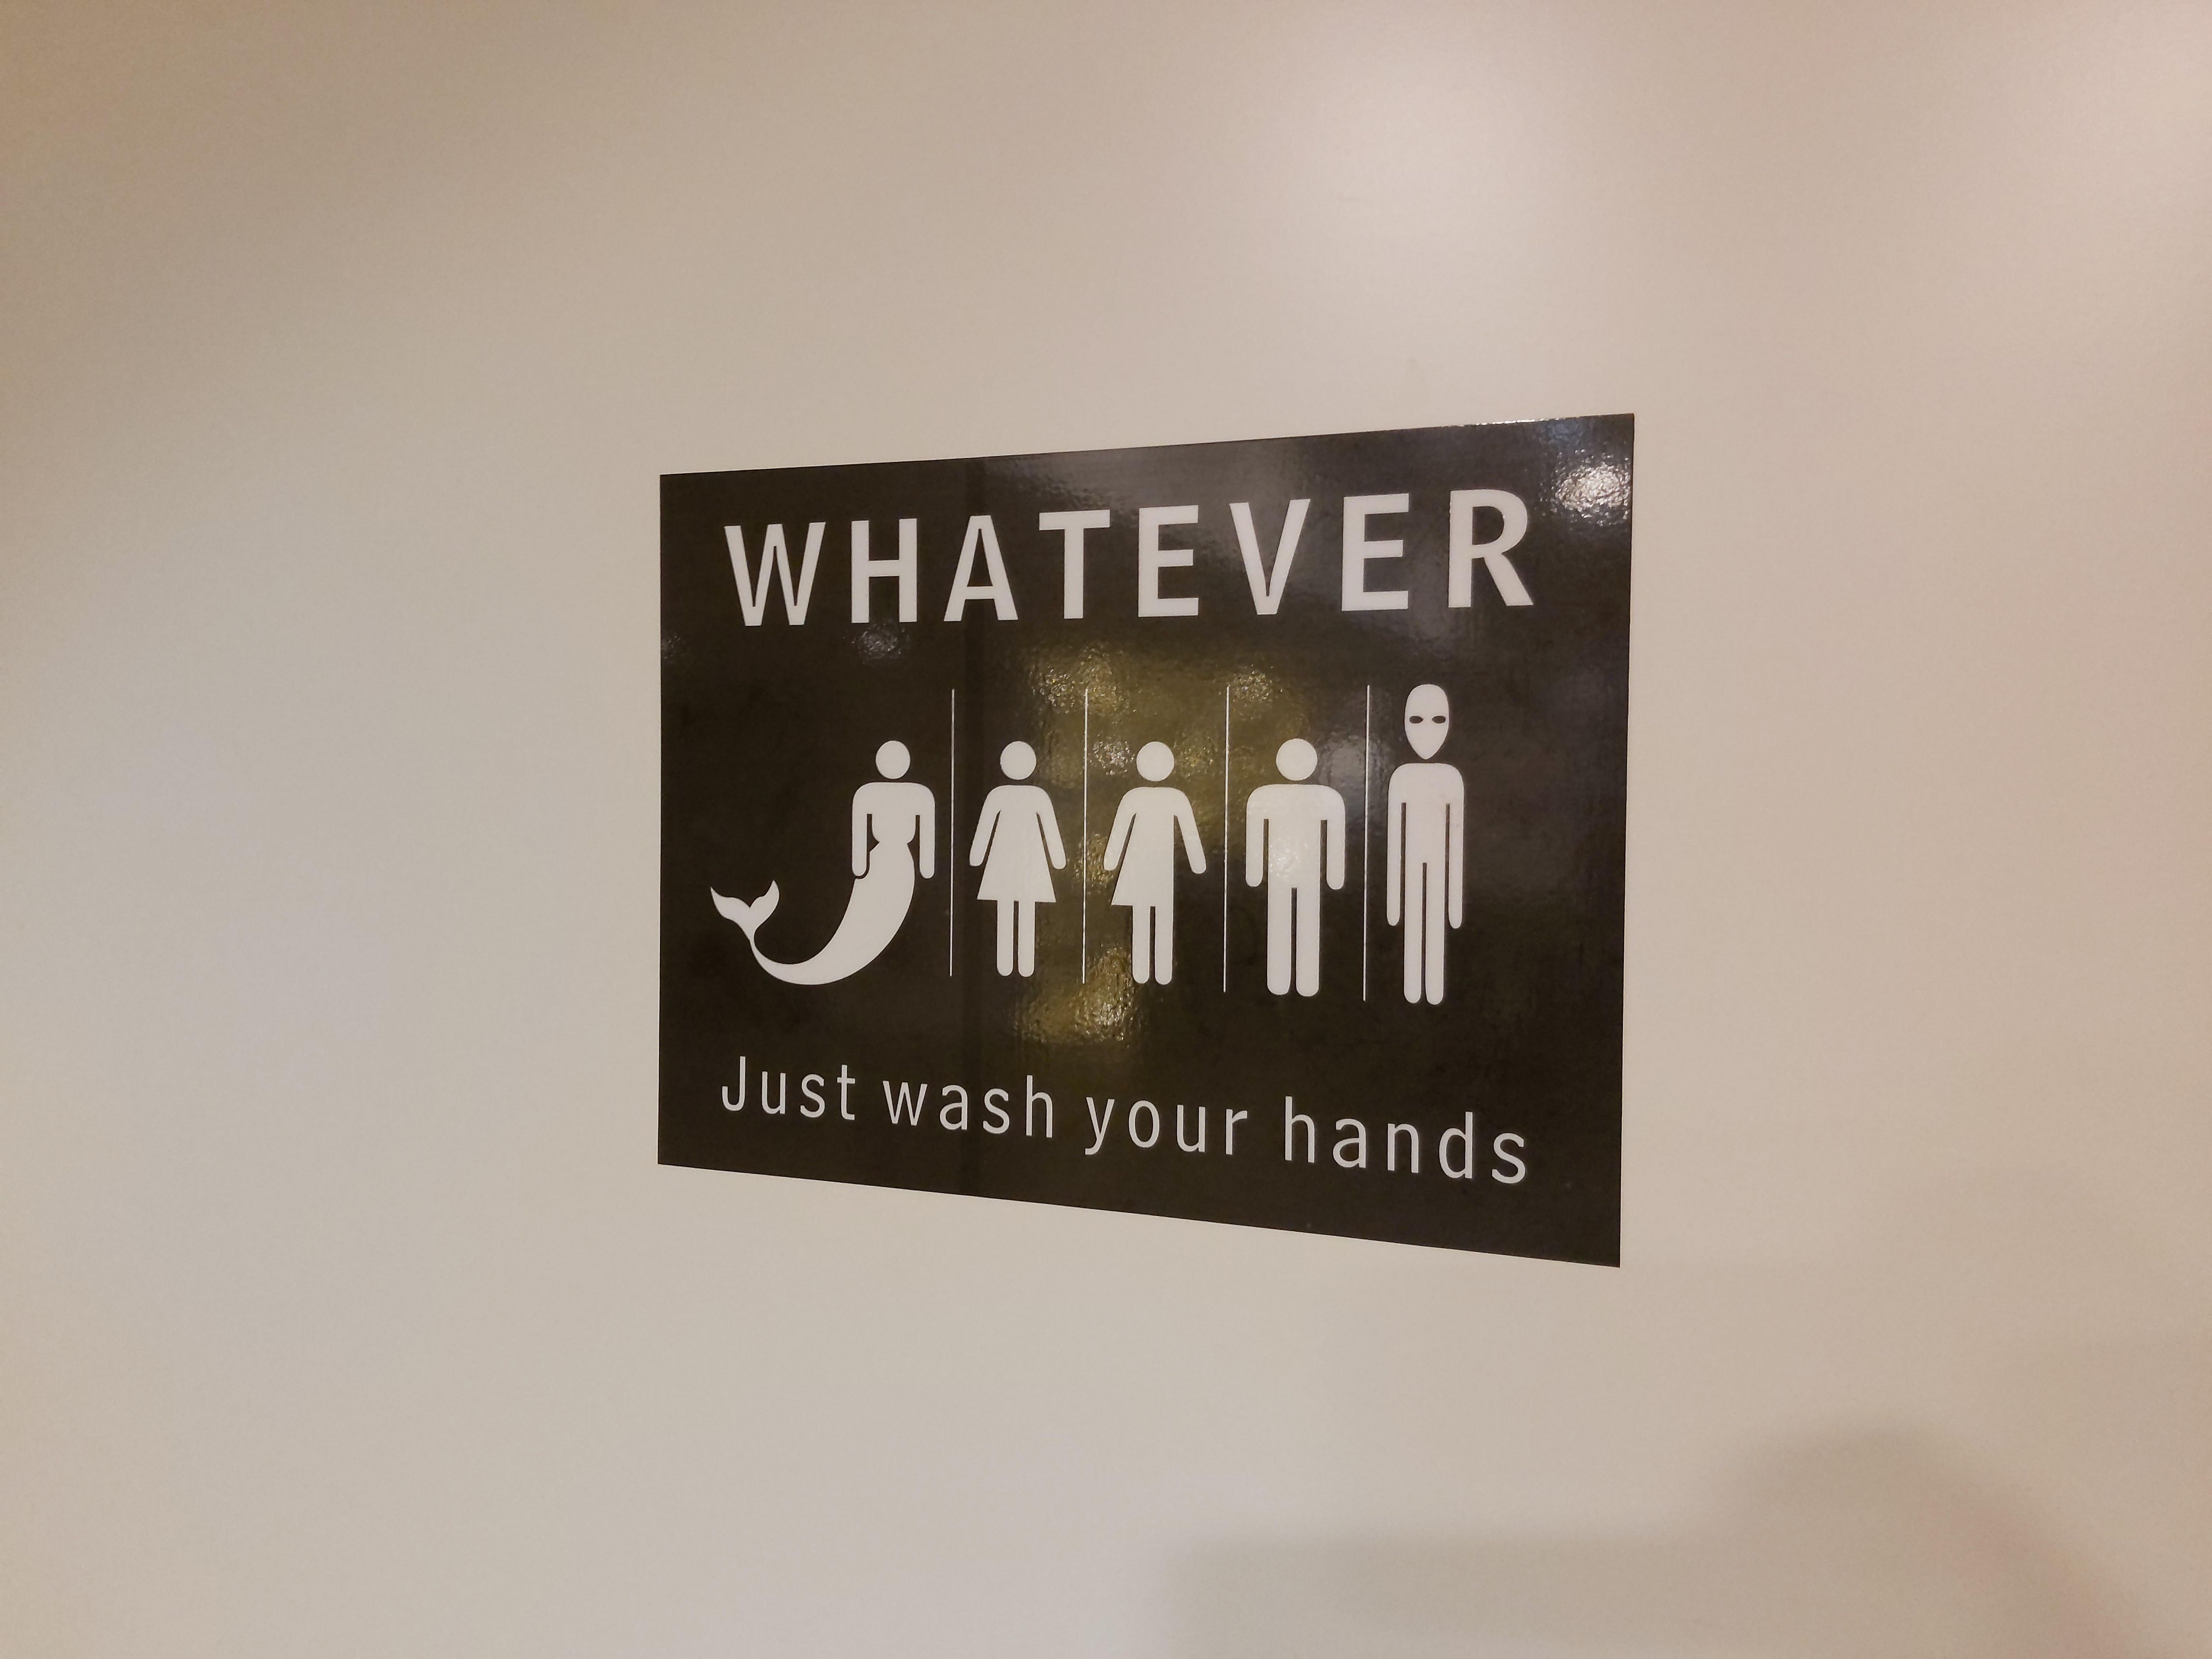 Bathroom at my local shopping center